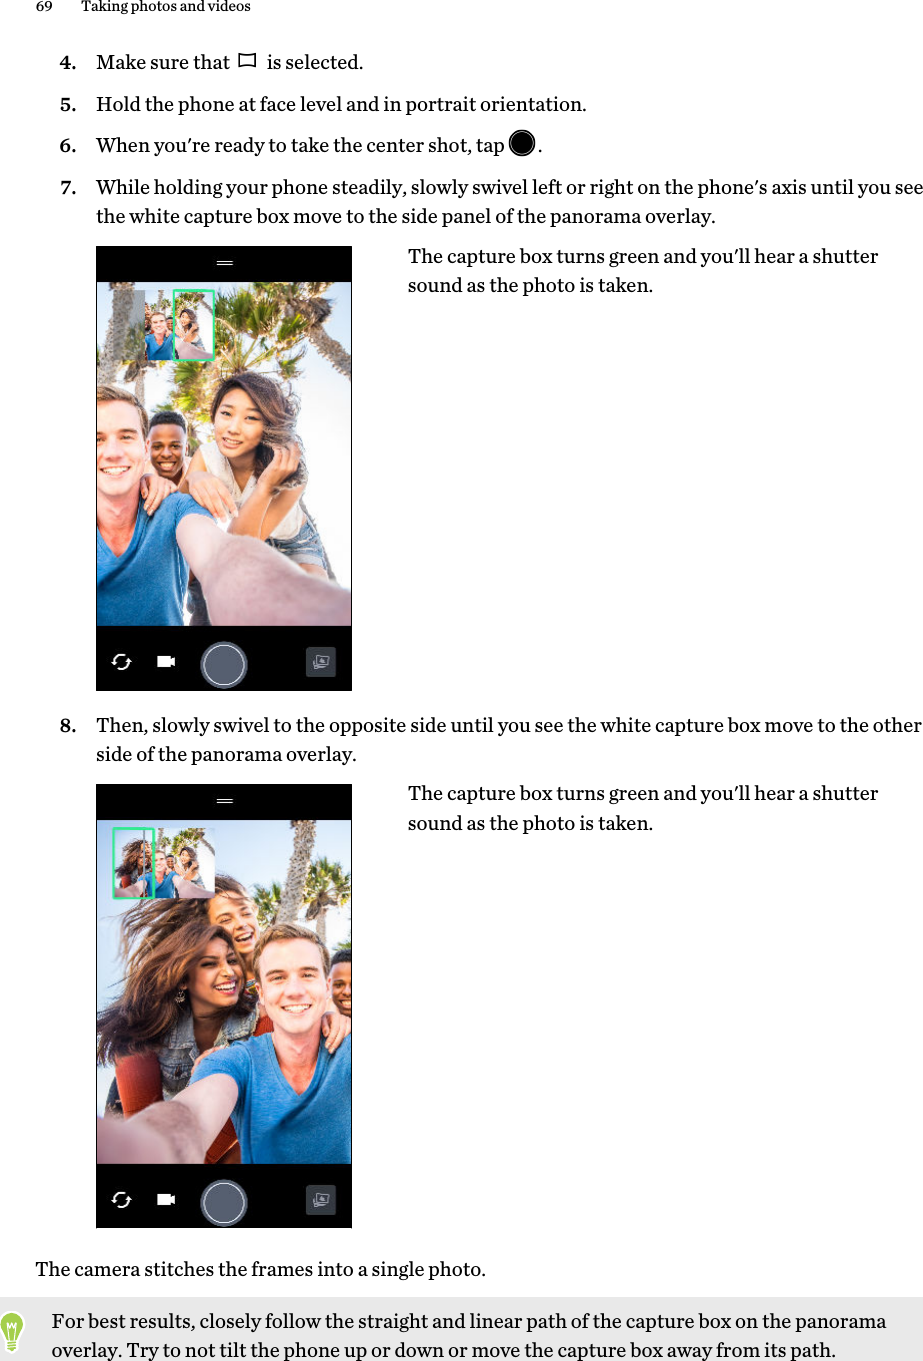 4. Make sure that   is selected.5. Hold the phone at face level and in portrait orientation.6. When you&apos;re ready to take the center shot, tap  .7. While holding your phone steadily, slowly swivel left or right on the phone&apos;s axis until you seethe white capture box move to the side panel of the panorama overlay. The capture box turns green and you&apos;ll hear a shuttersound as the photo is taken.8. Then, slowly swivel to the opposite side until you see the white capture box move to the otherside of the panorama overlay.The capture box turns green and you&apos;ll hear a shuttersound as the photo is taken.The camera stitches the frames into a single photo.For best results, closely follow the straight and linear path of the capture box on the panoramaoverlay. Try to not tilt the phone up or down or move the capture box away from its path.69 Taking photos and videos